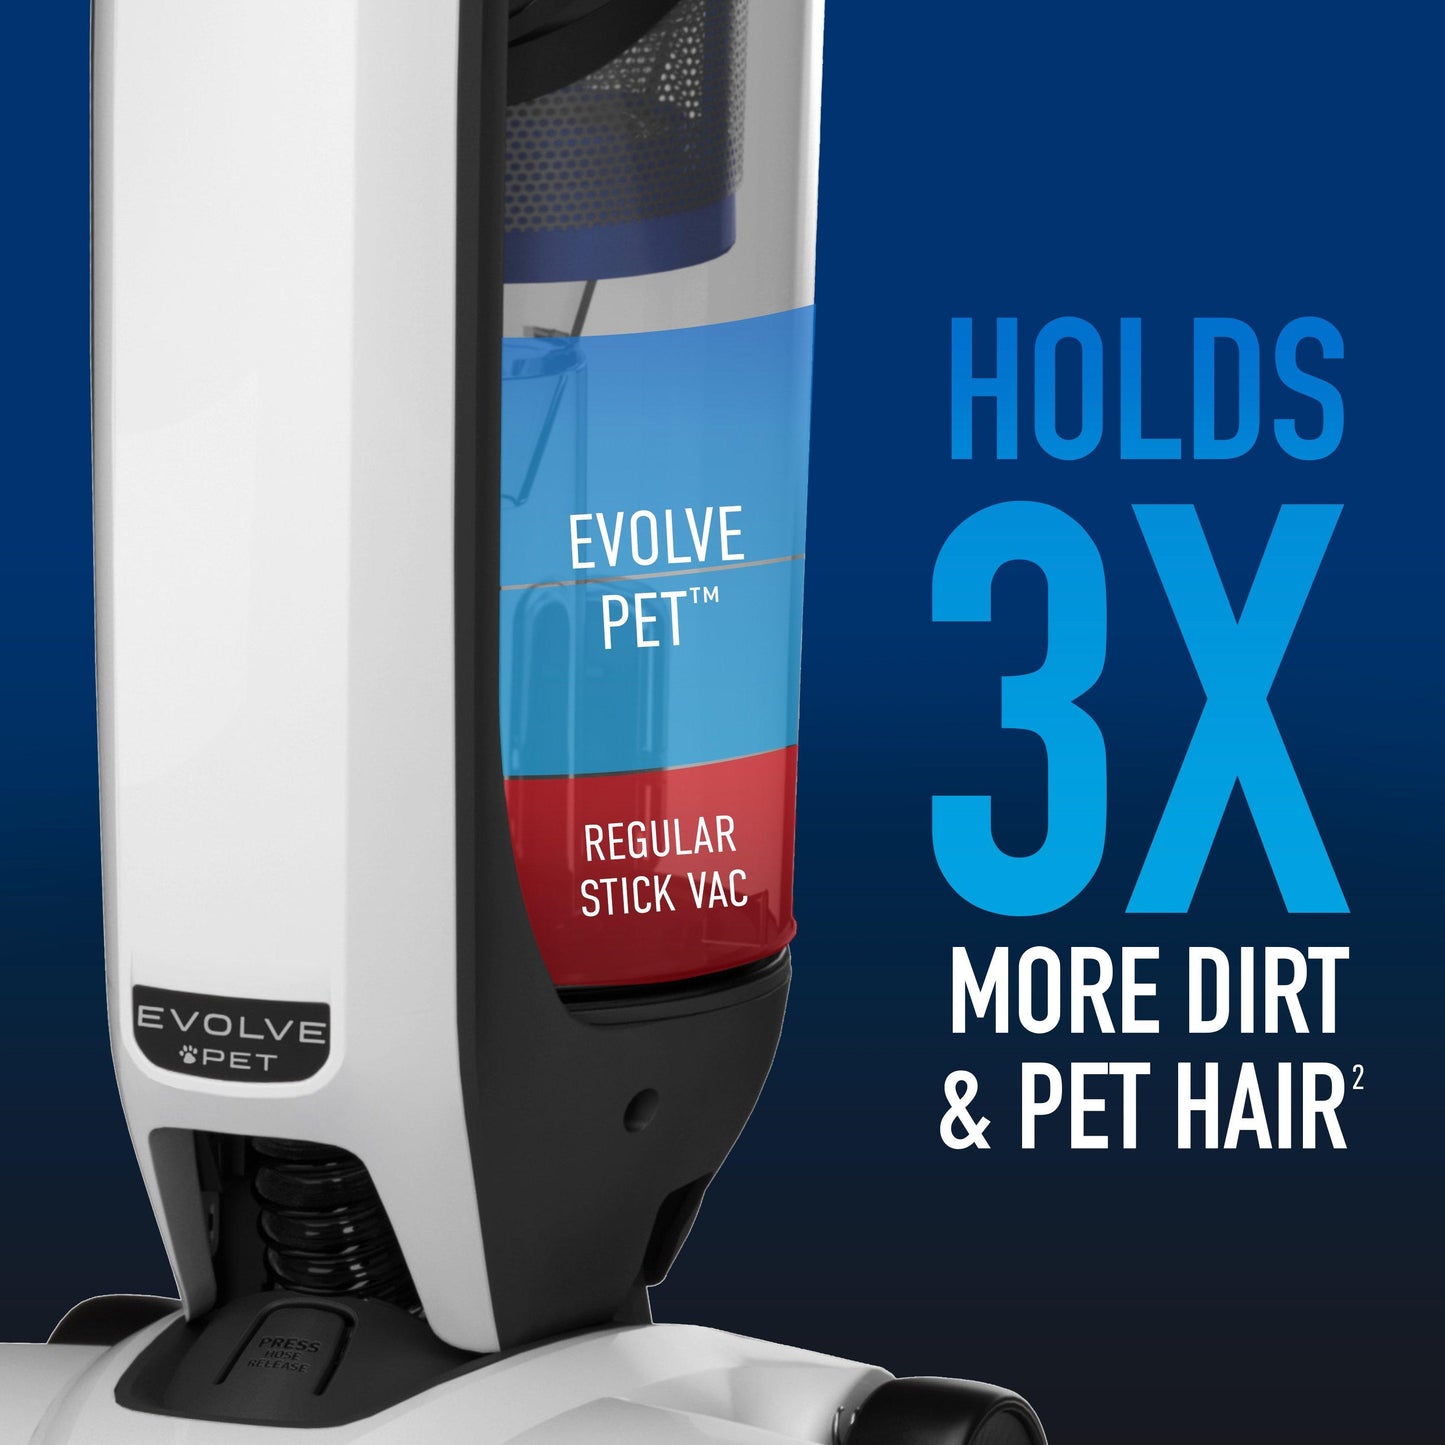 The dust bin of the Evolve Pet holds three times more dirt and pet hair than a regular stick vacuum.